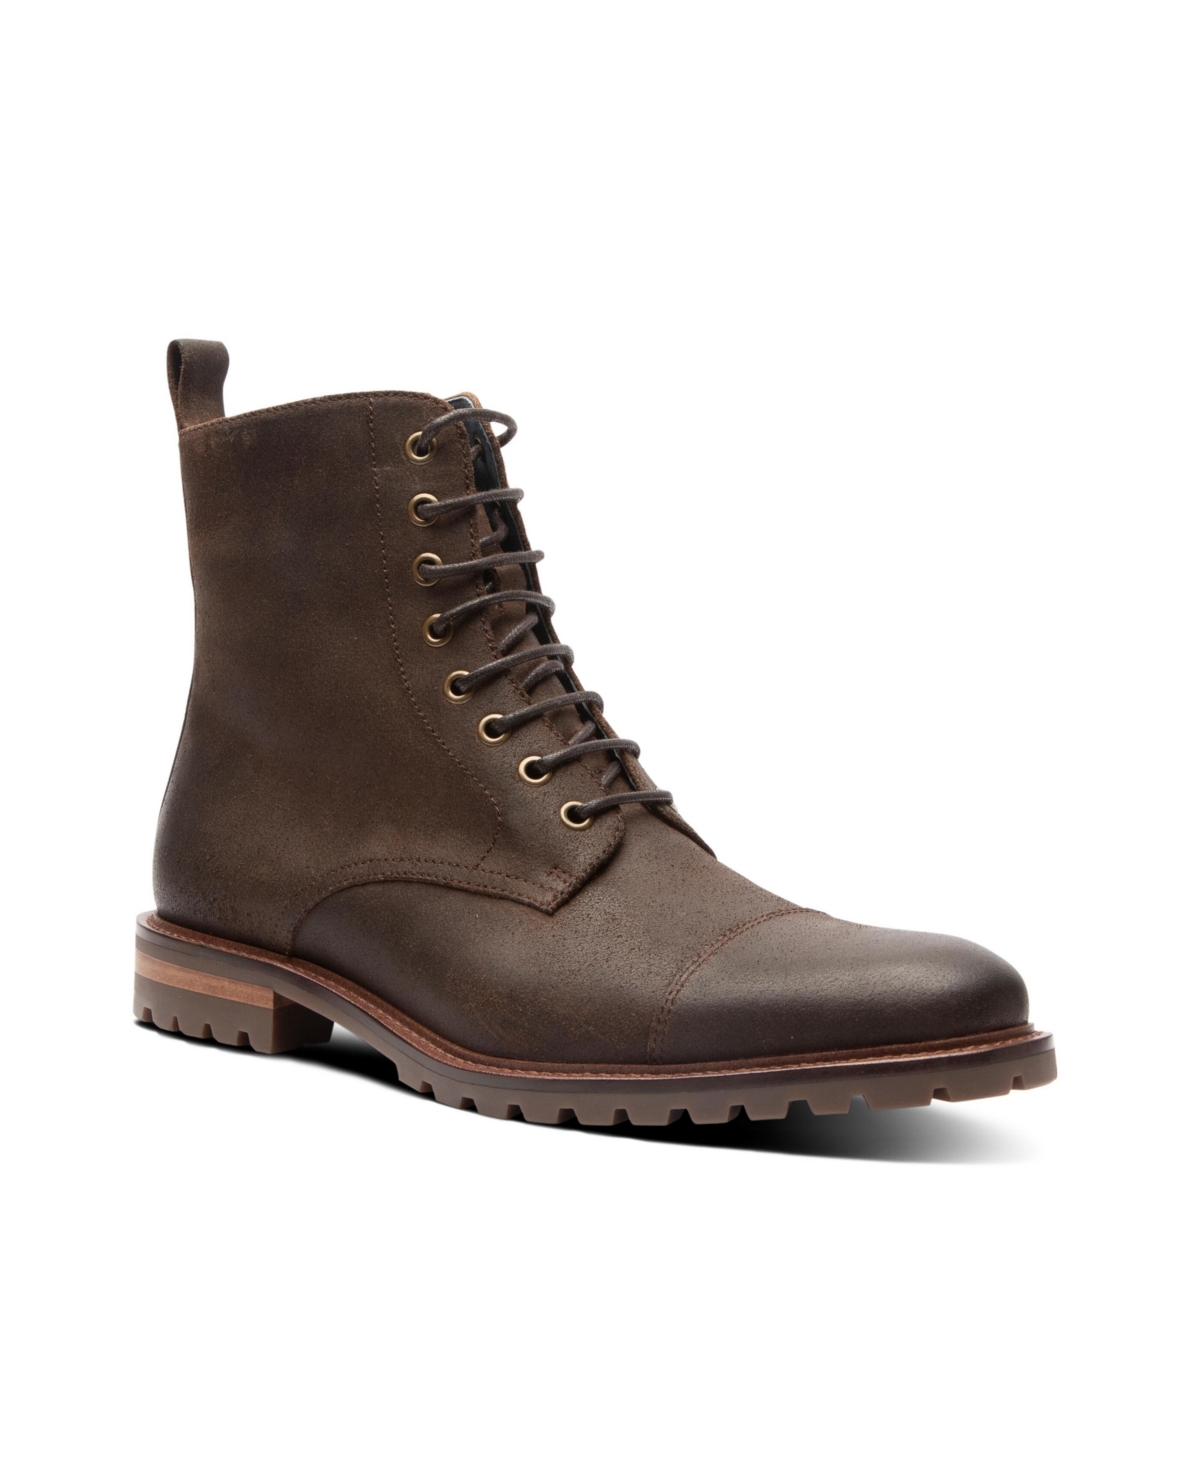 BLAKE MCKAY MEN'S BRYAN BOOT CASUAL TALL CAP TOE LACE-UP BOOTS